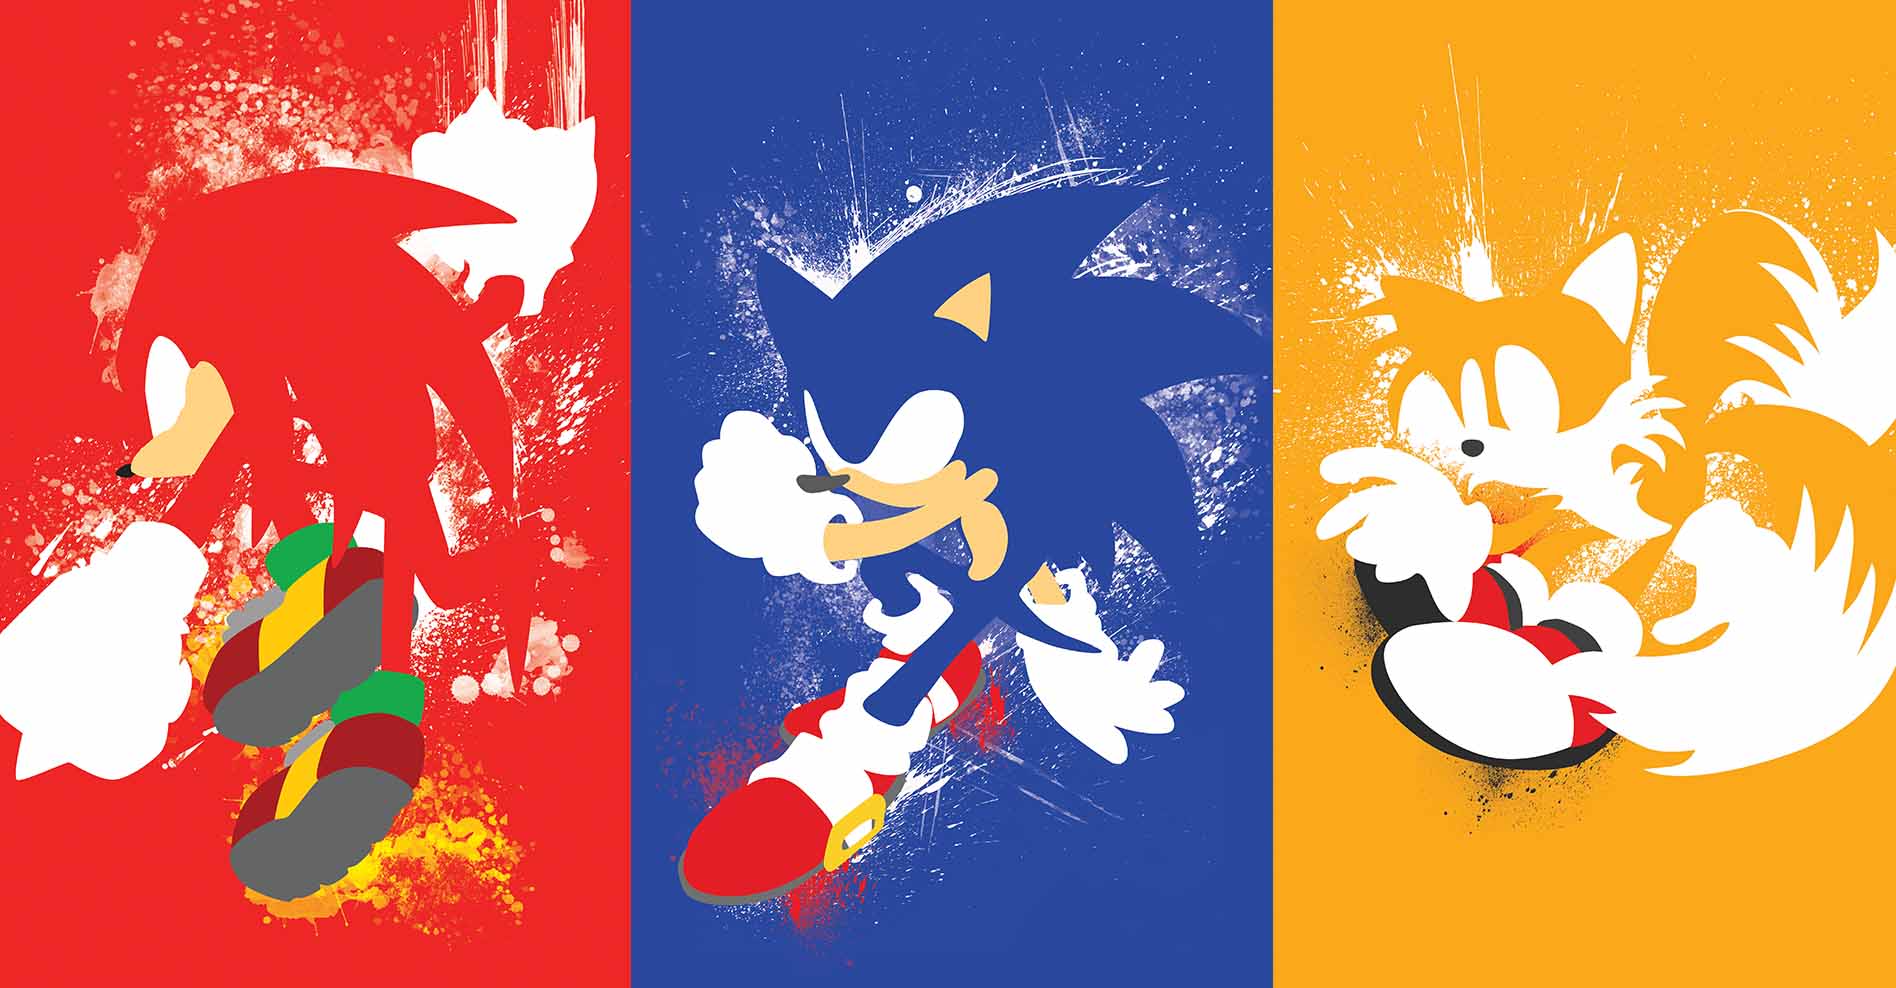 Sonic the Hedgehog Posters